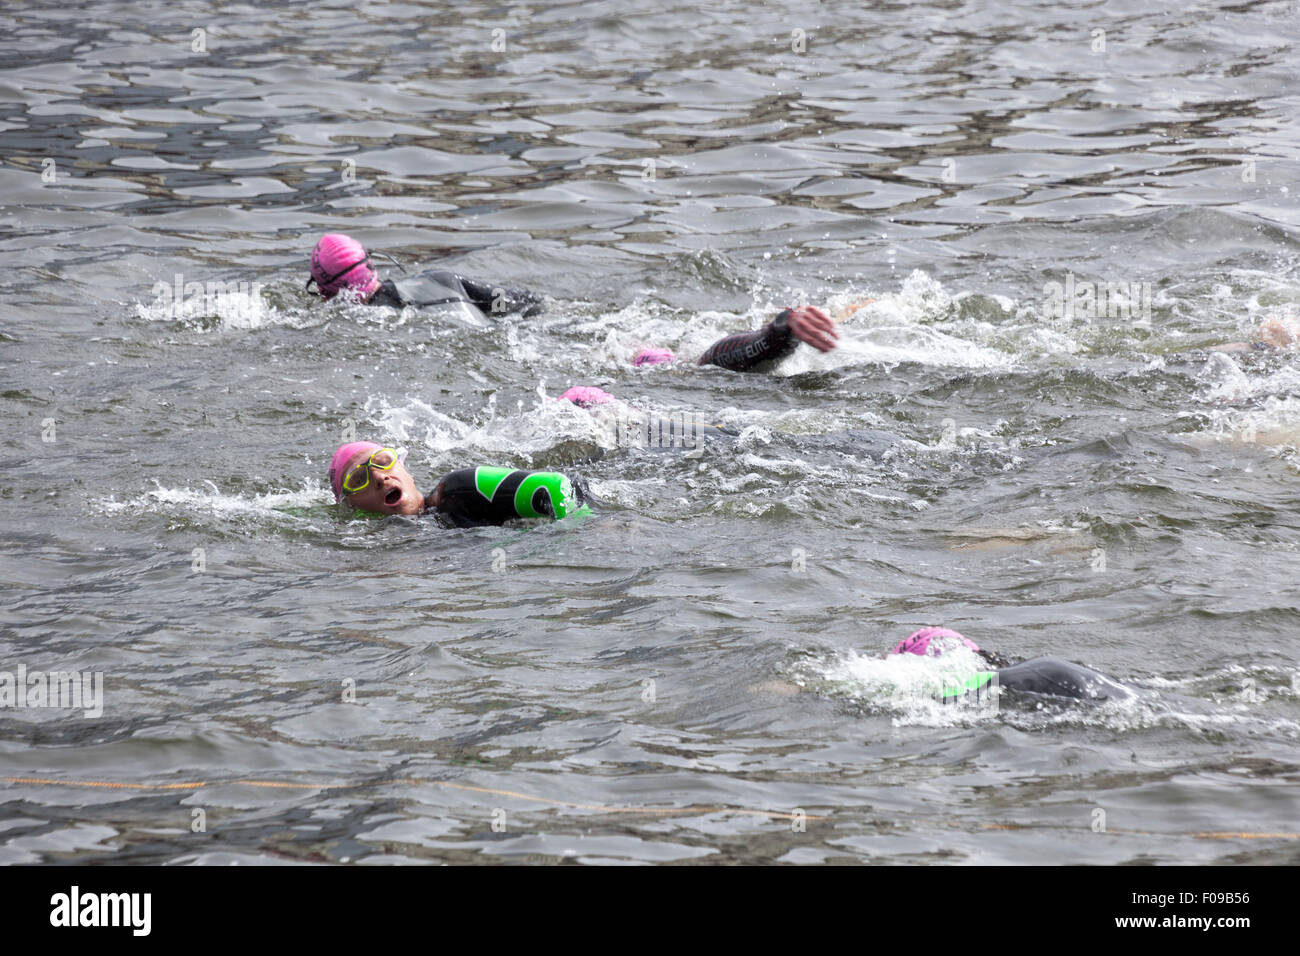 London, UK. 9 August 2015 -  The participants of the annual London Triathlon swim, cycle and run around Docklands in the eastern part of the capital.The world’s largest triathlon with its 13,000 participants, caters for all levels and abilities, and features Super-Sprint, Sprint, Olympic and Olympic Plus distances. Credit: Nathaniel Noir/Alamy Live News Stock Photo